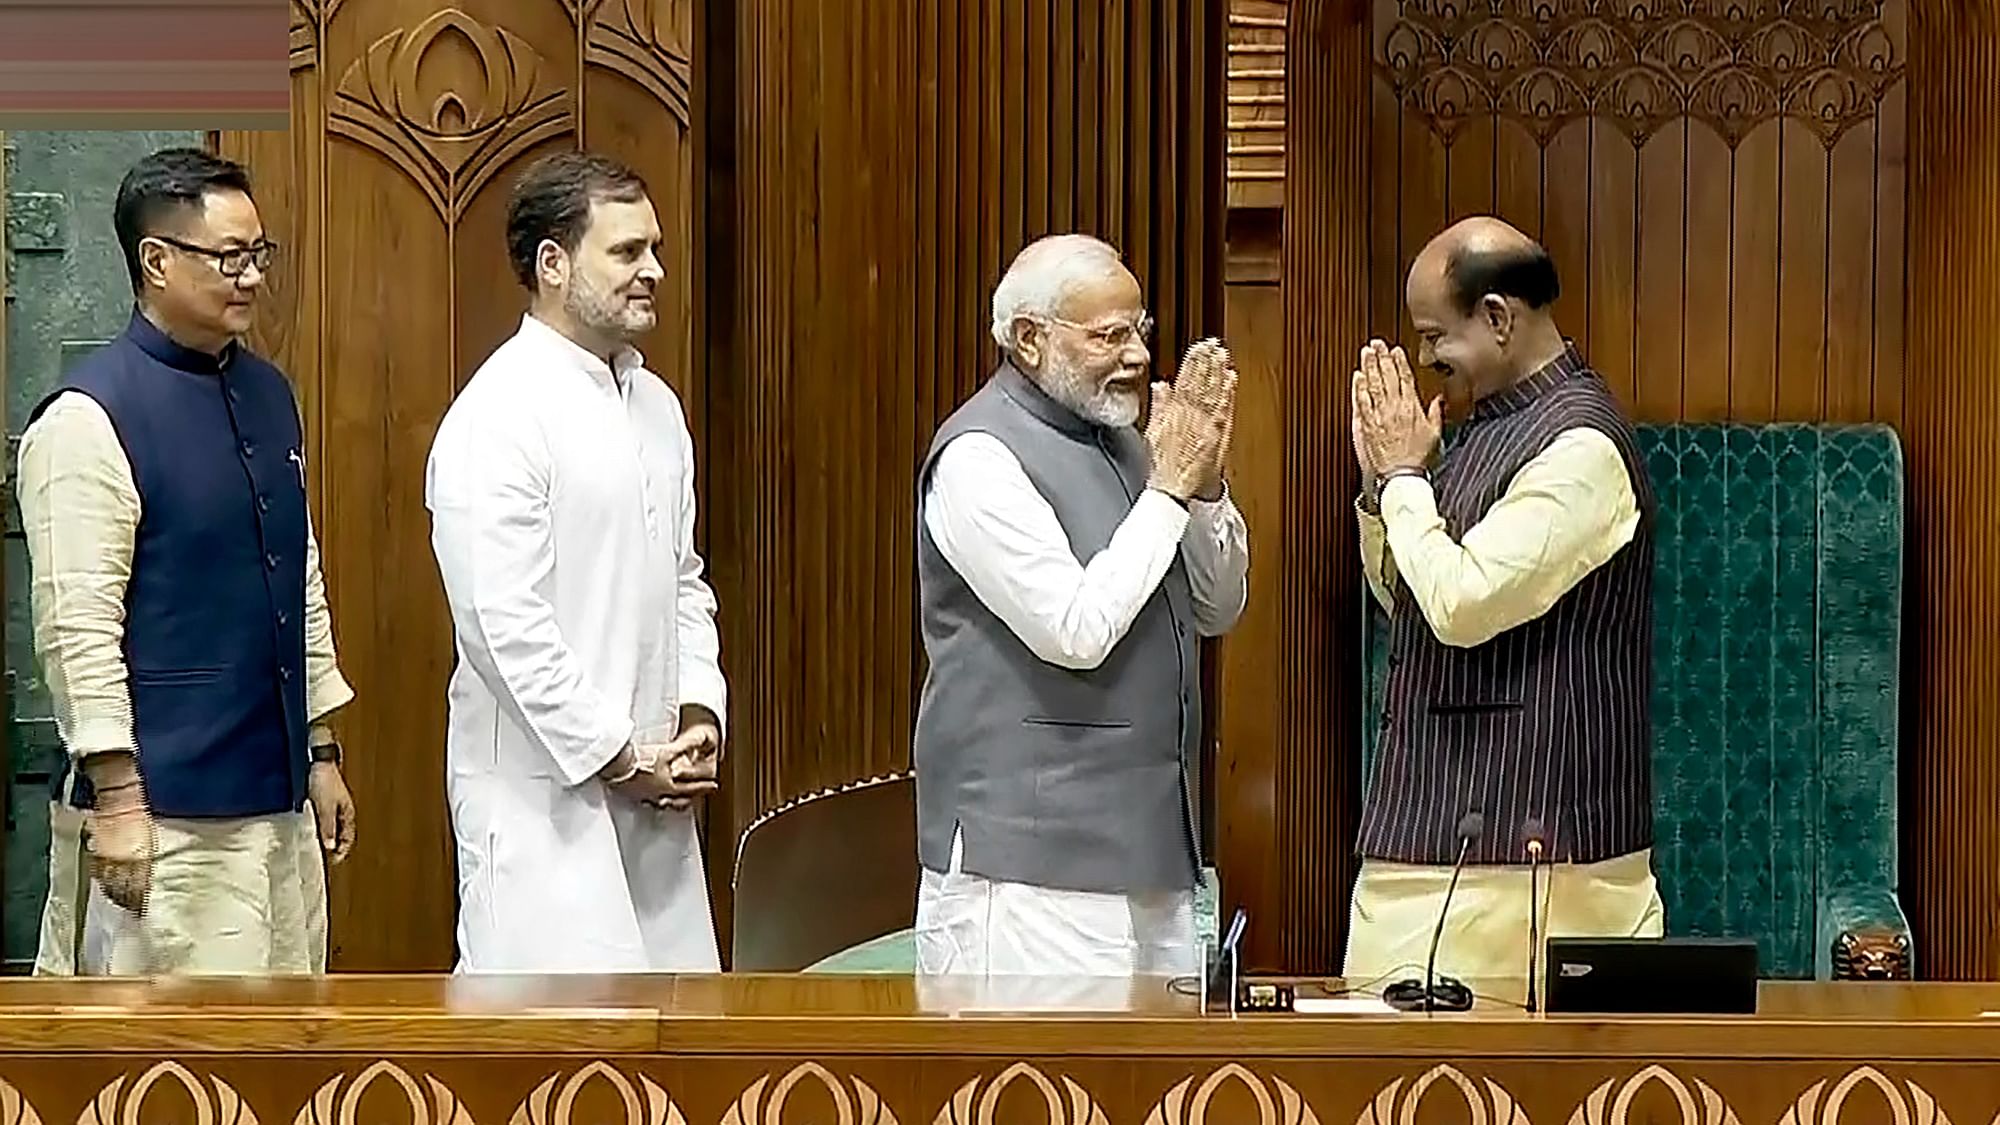 <div class="paragraphs"><p>Prime Minister Narendra Modi greets Om Birla after the latter was elected as the Speaker of the House during the first session of the 18th Lok Sabha, in New Delhi, Wednesday, June 26, 2024. Leader of the Opposition Rahul Gandhi and Union Minister for Parliamentary Affairs Kiren Rijiju are also seen. </p></div>